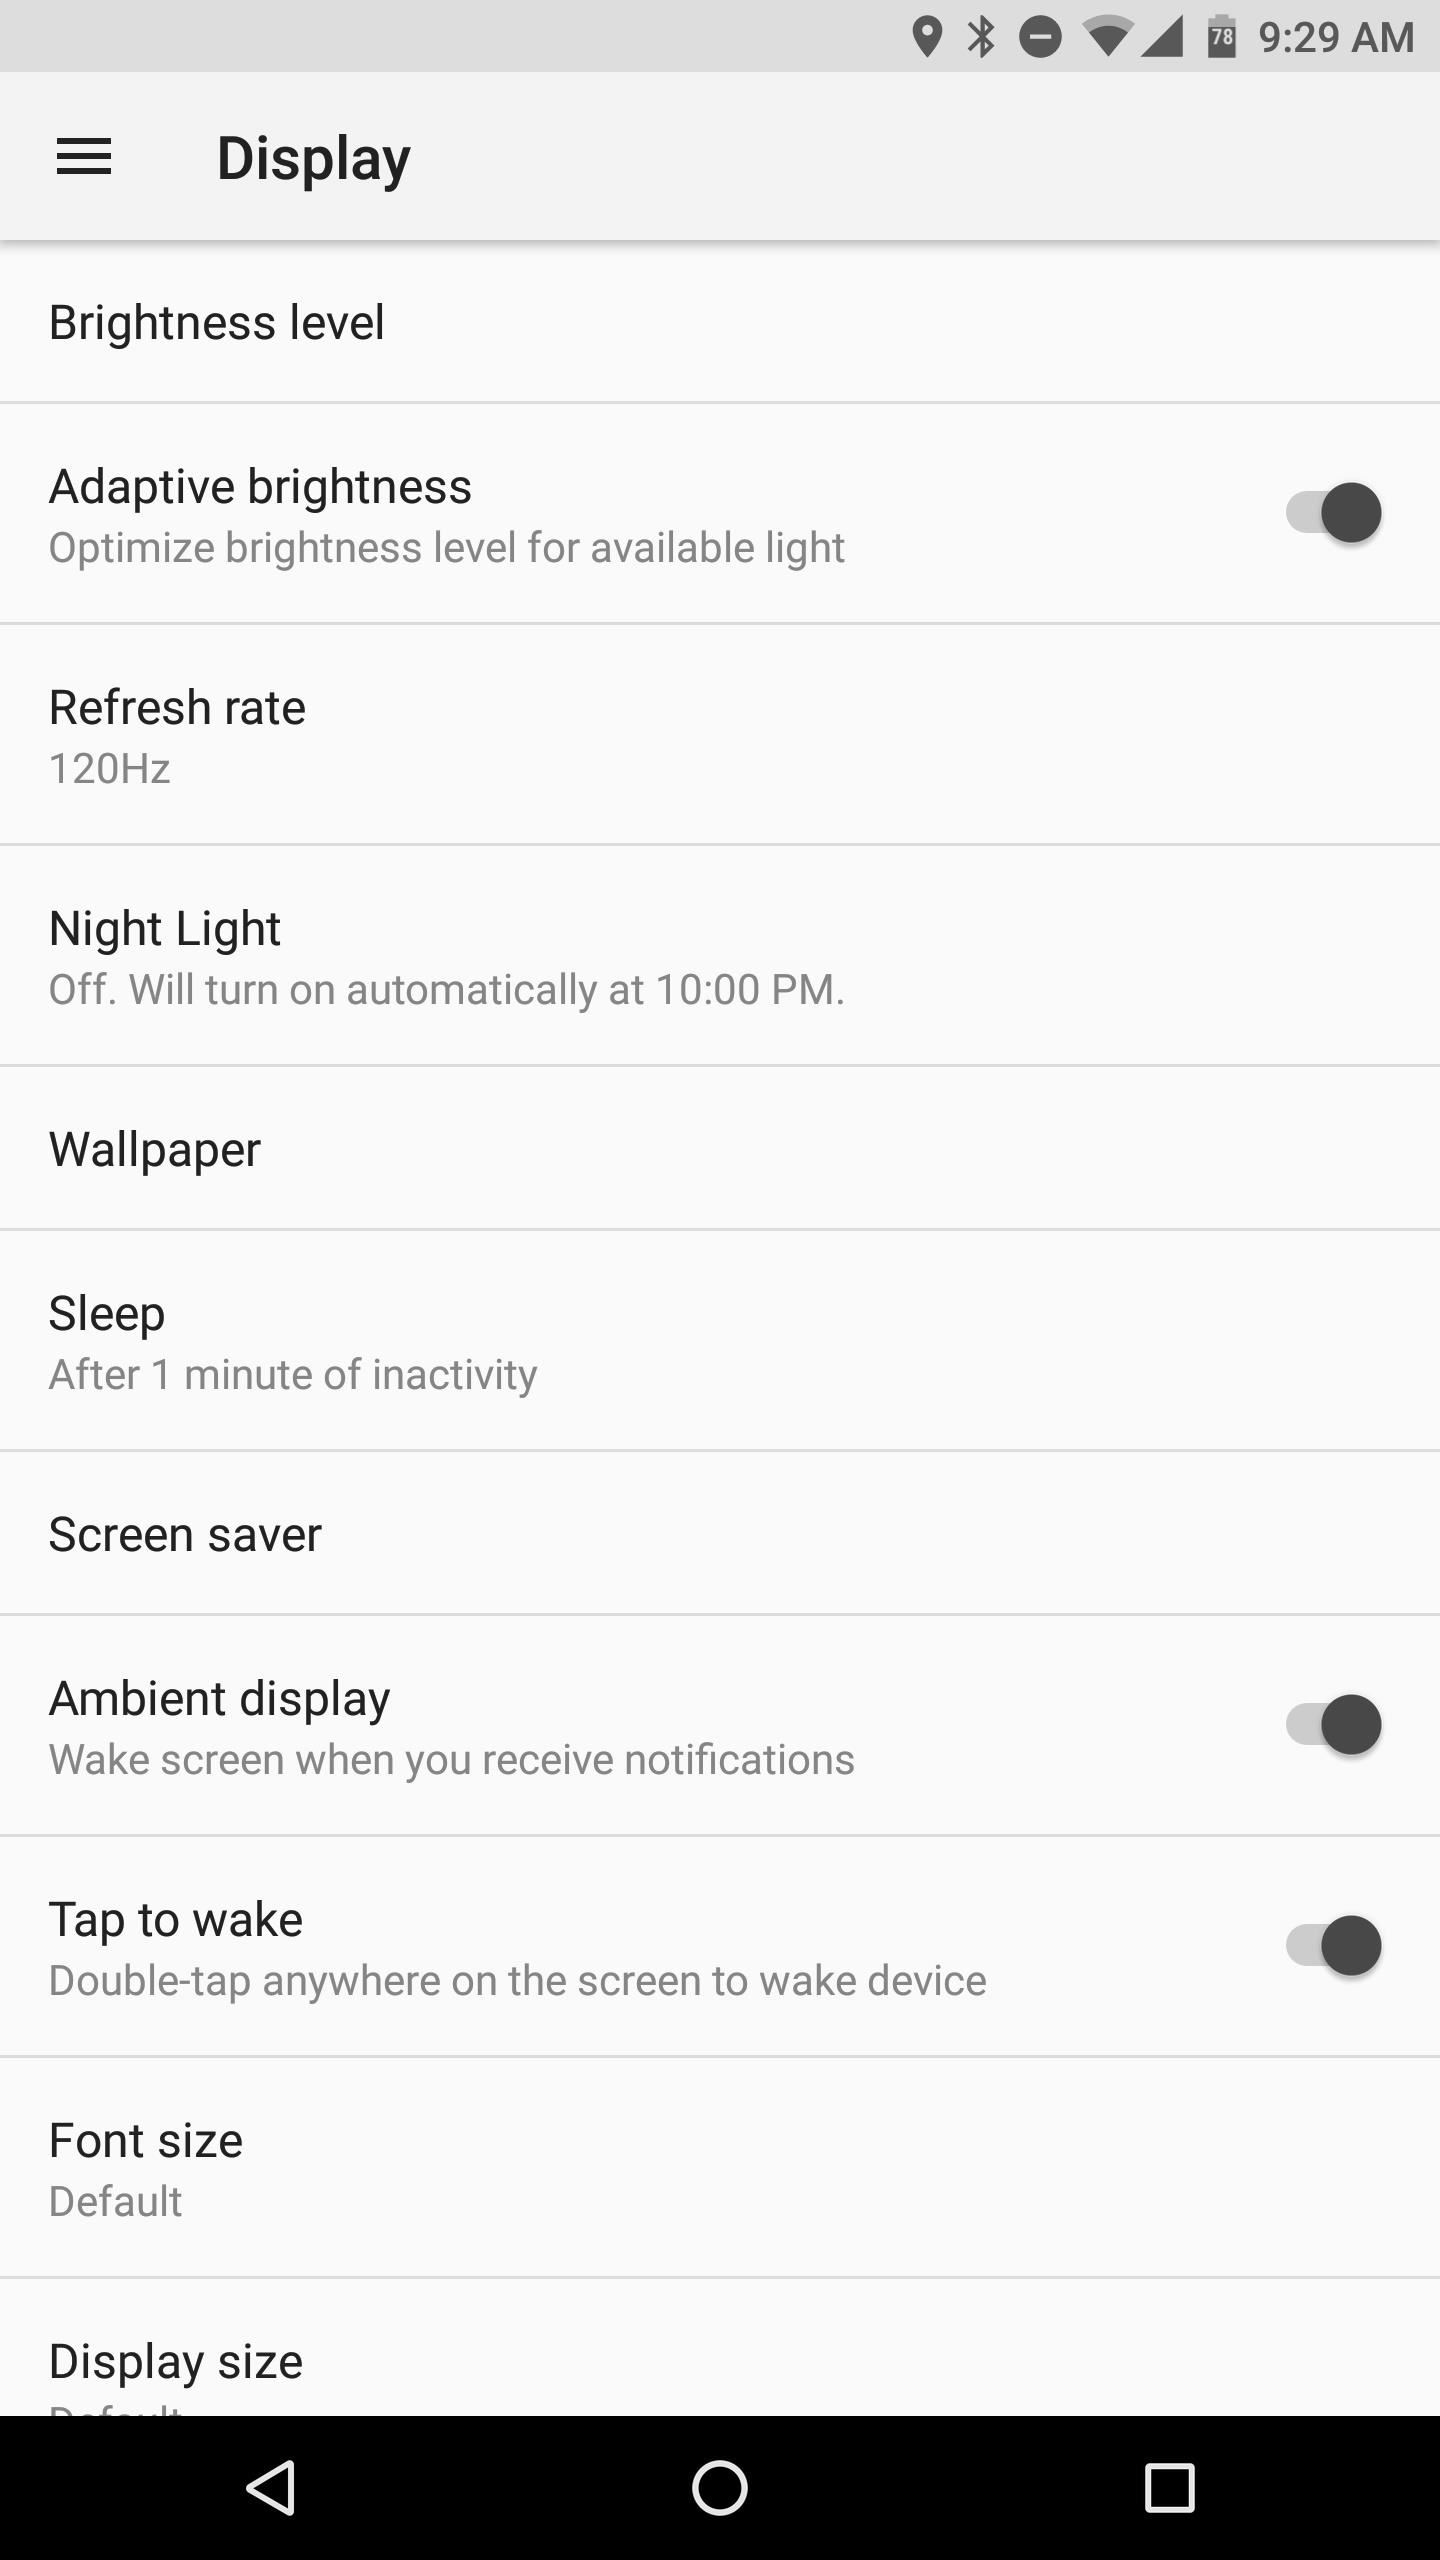 10 Razer Phone Features & Settings You Need to Know About